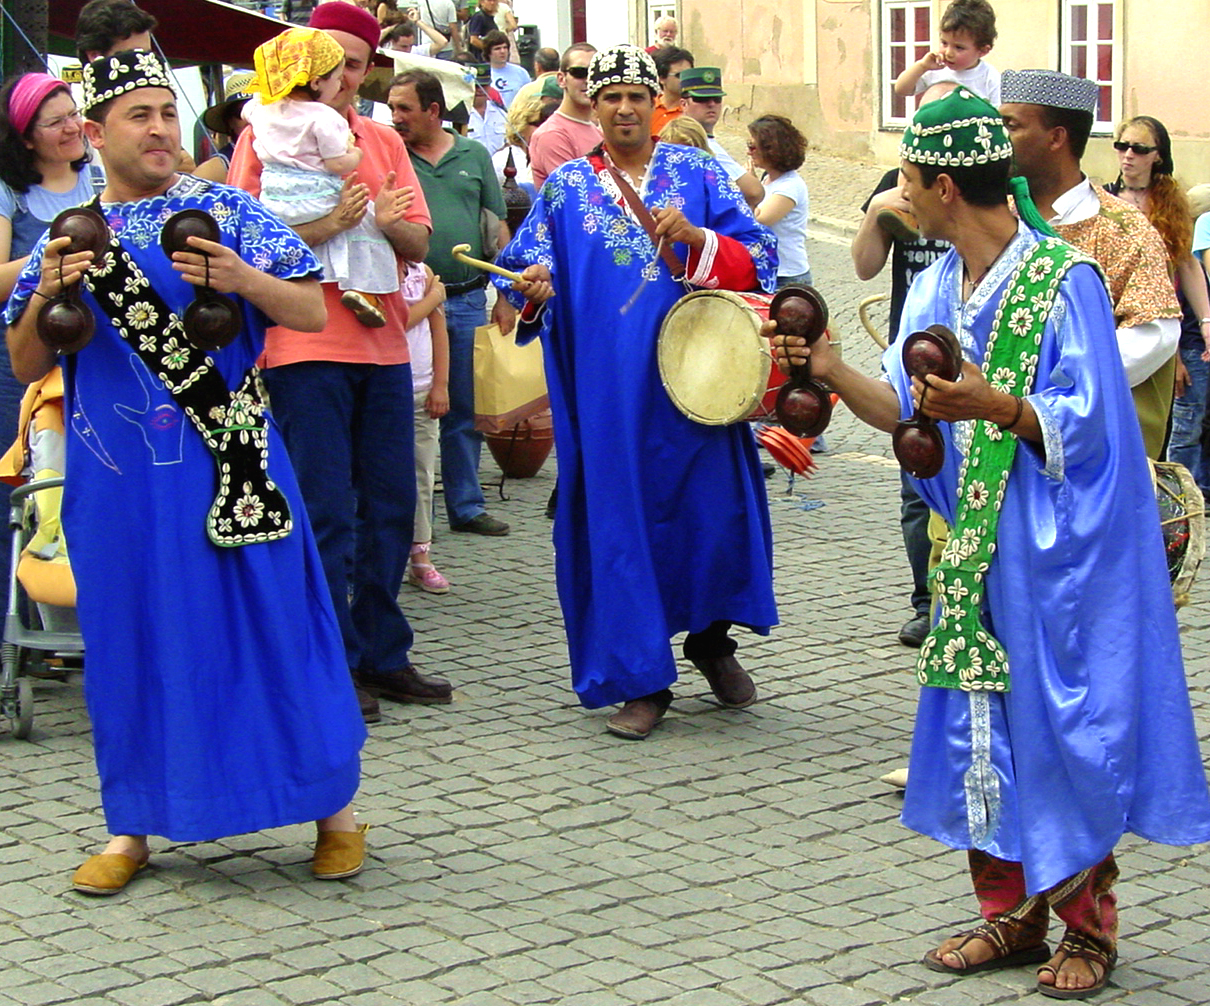 several people are wearing blue clothes and colorful hats